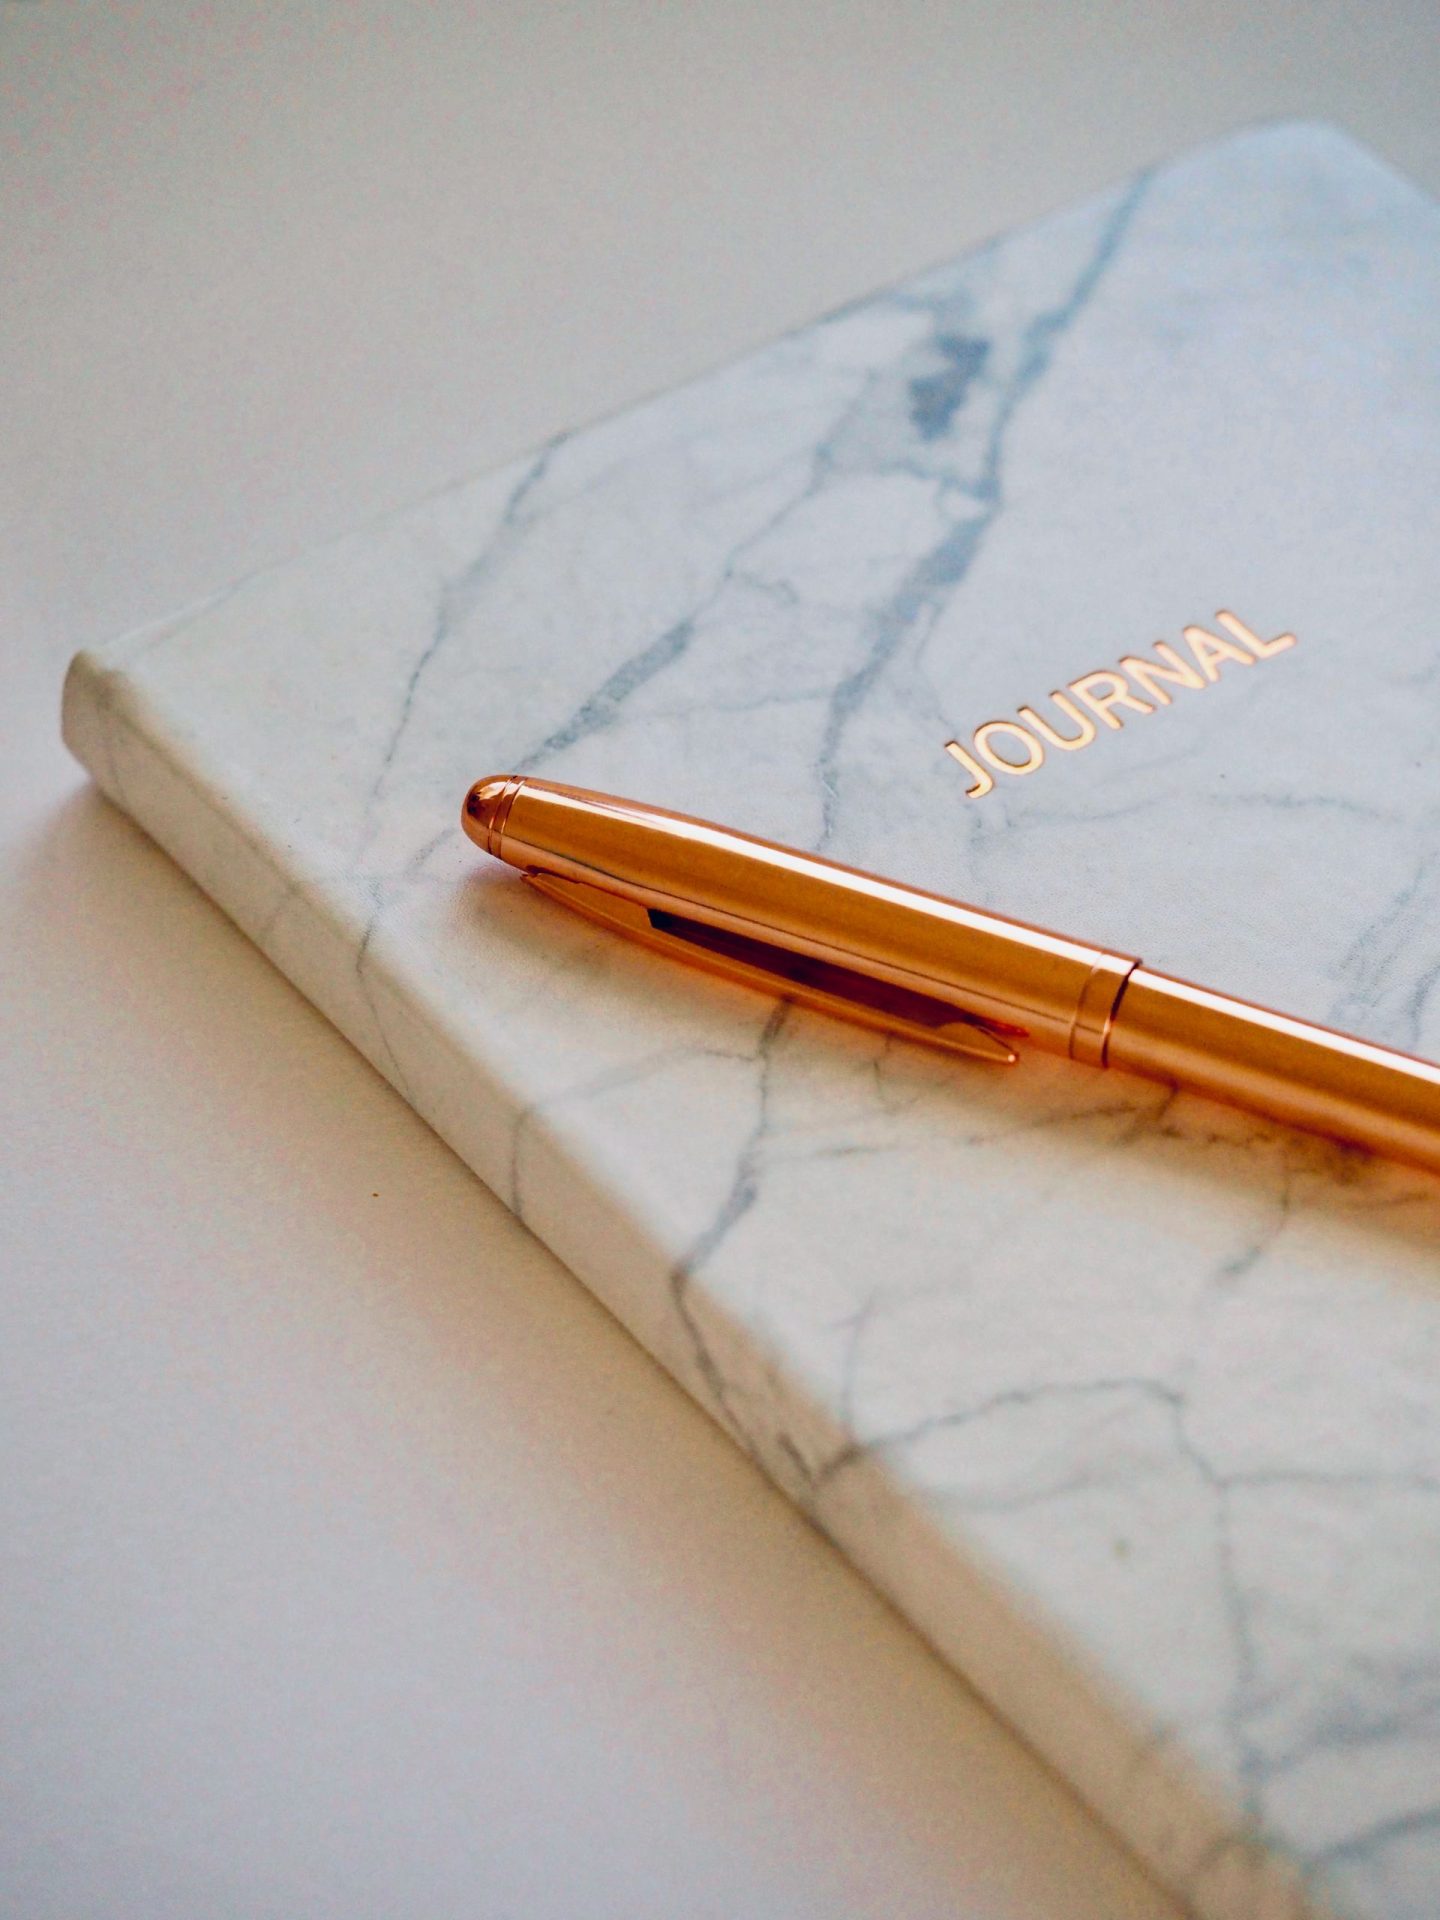 Staying positive during Coronavirus: a notebook with a marble design and the 'journal' written on the front